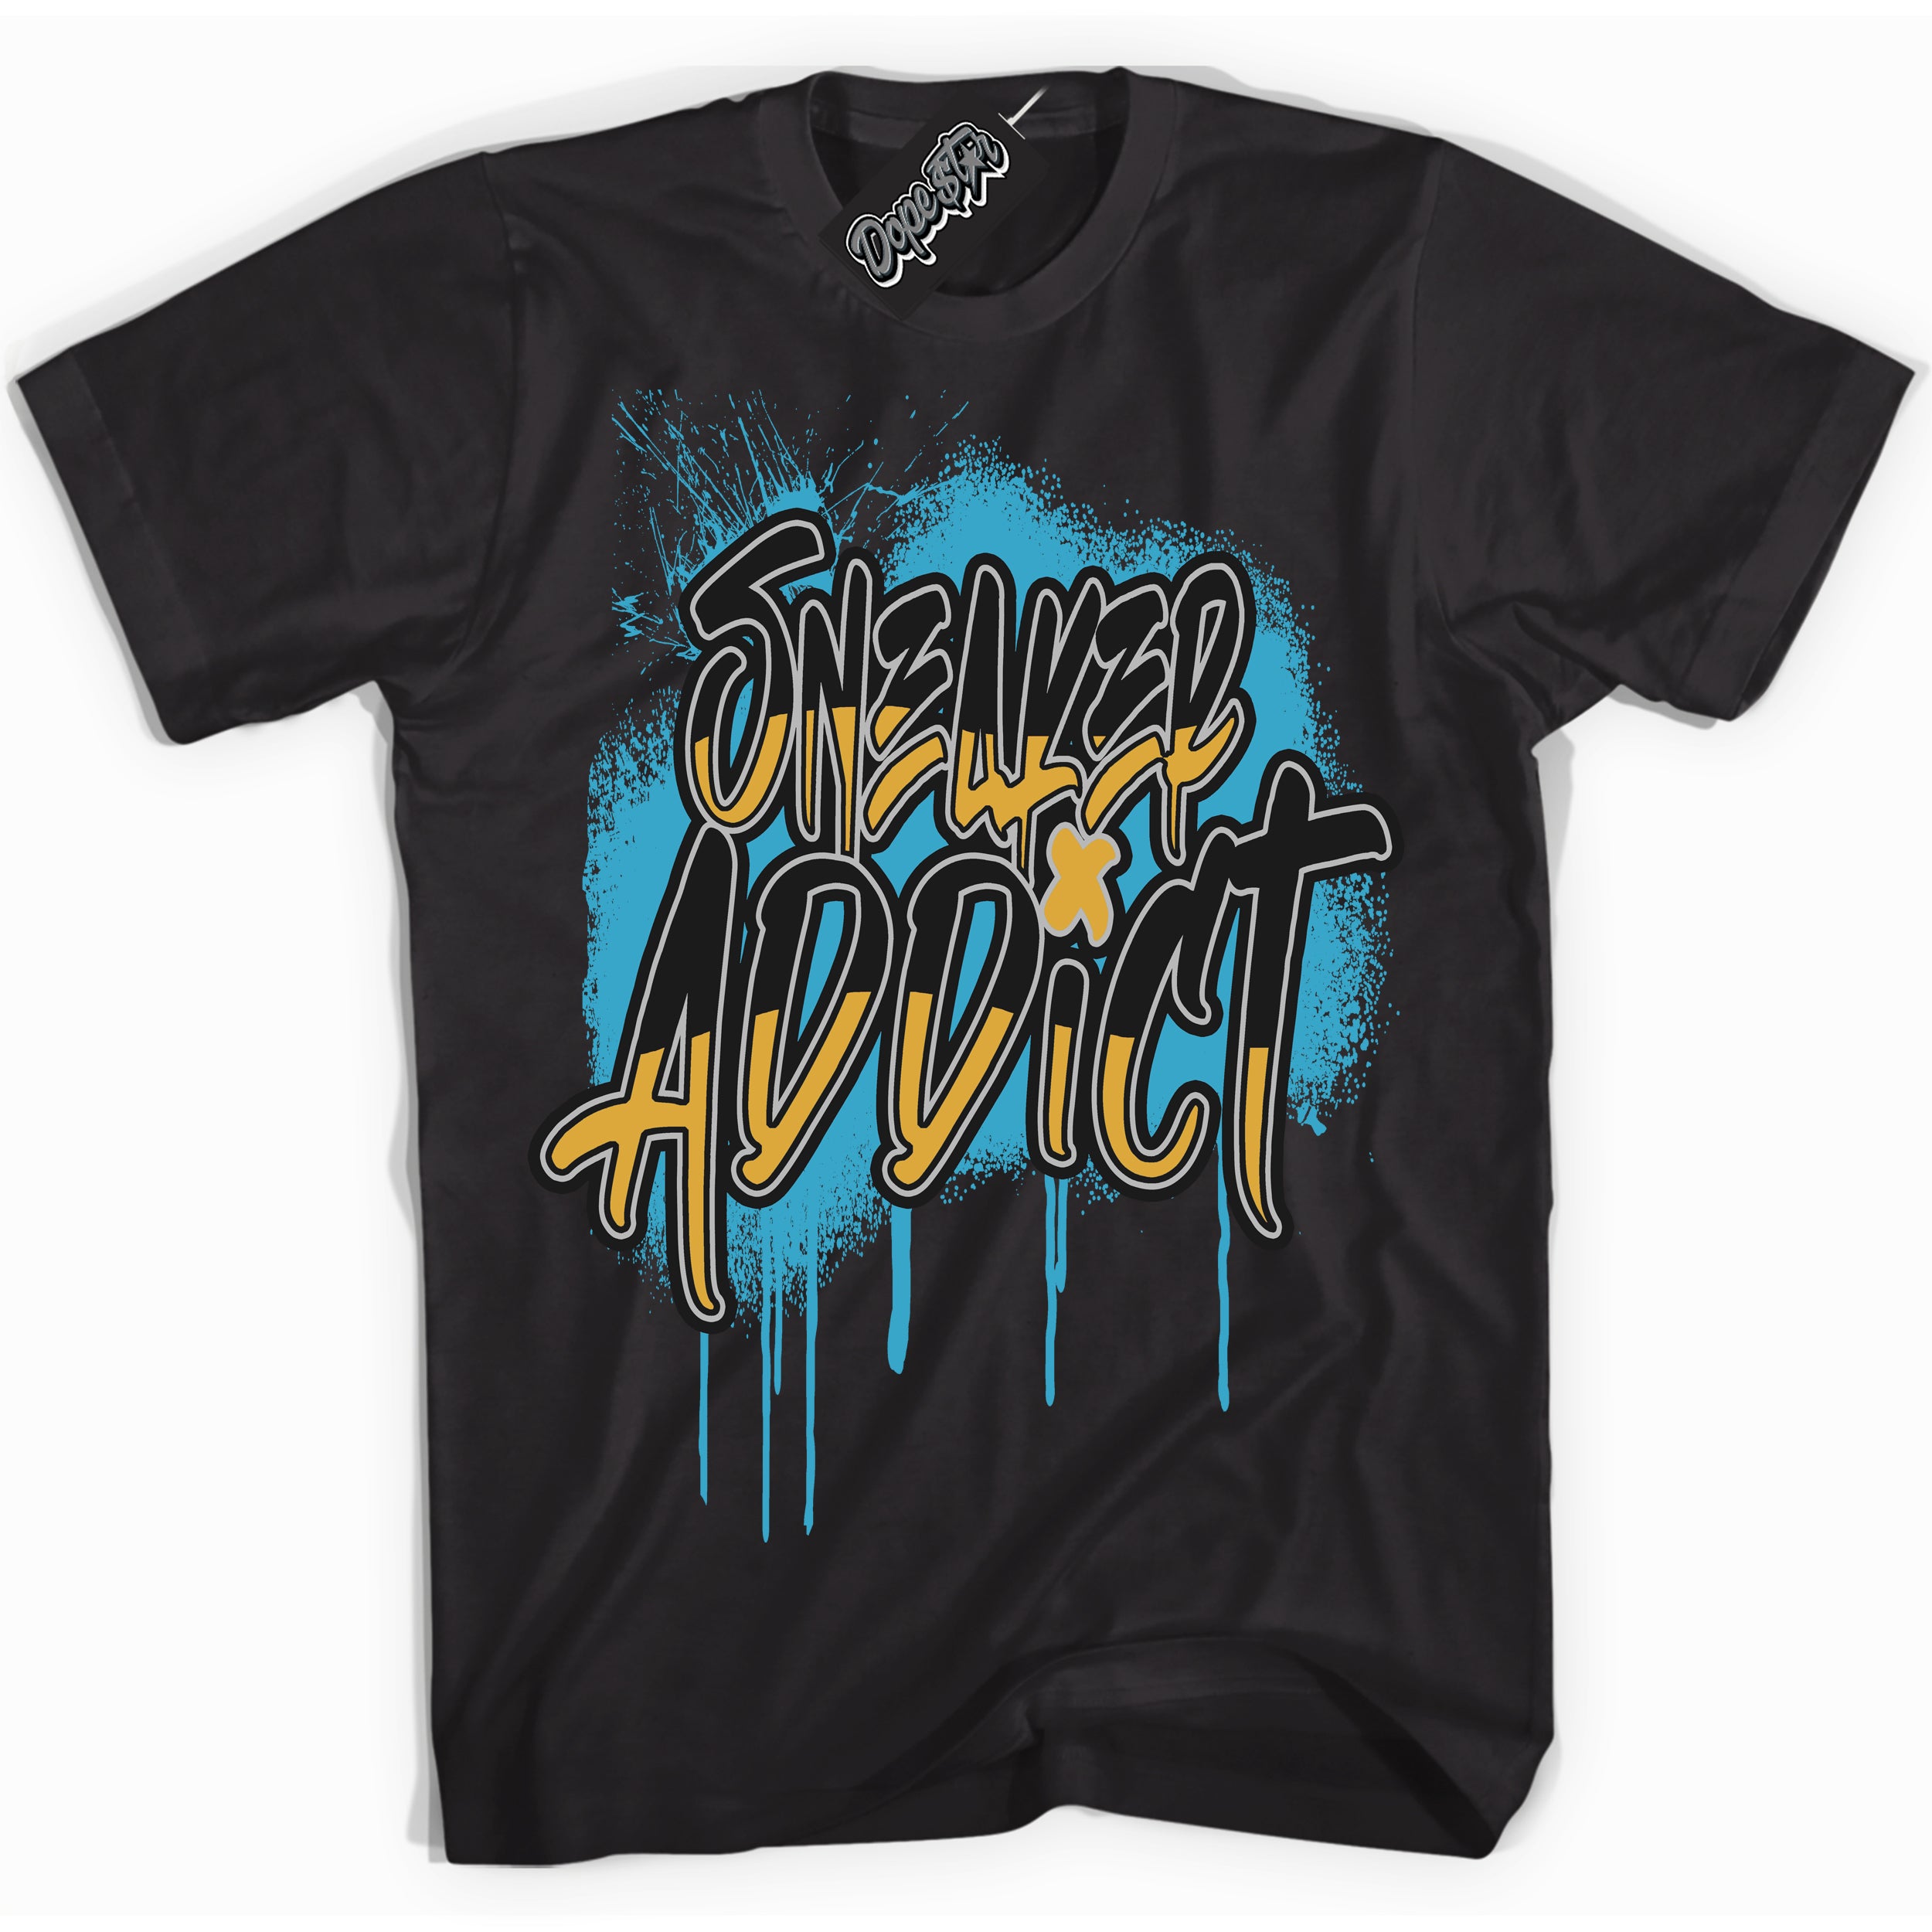 Cool Black graphic tee with “ Sneaker Addict ” print, that perfectly matches AQUA 5s sneakers 